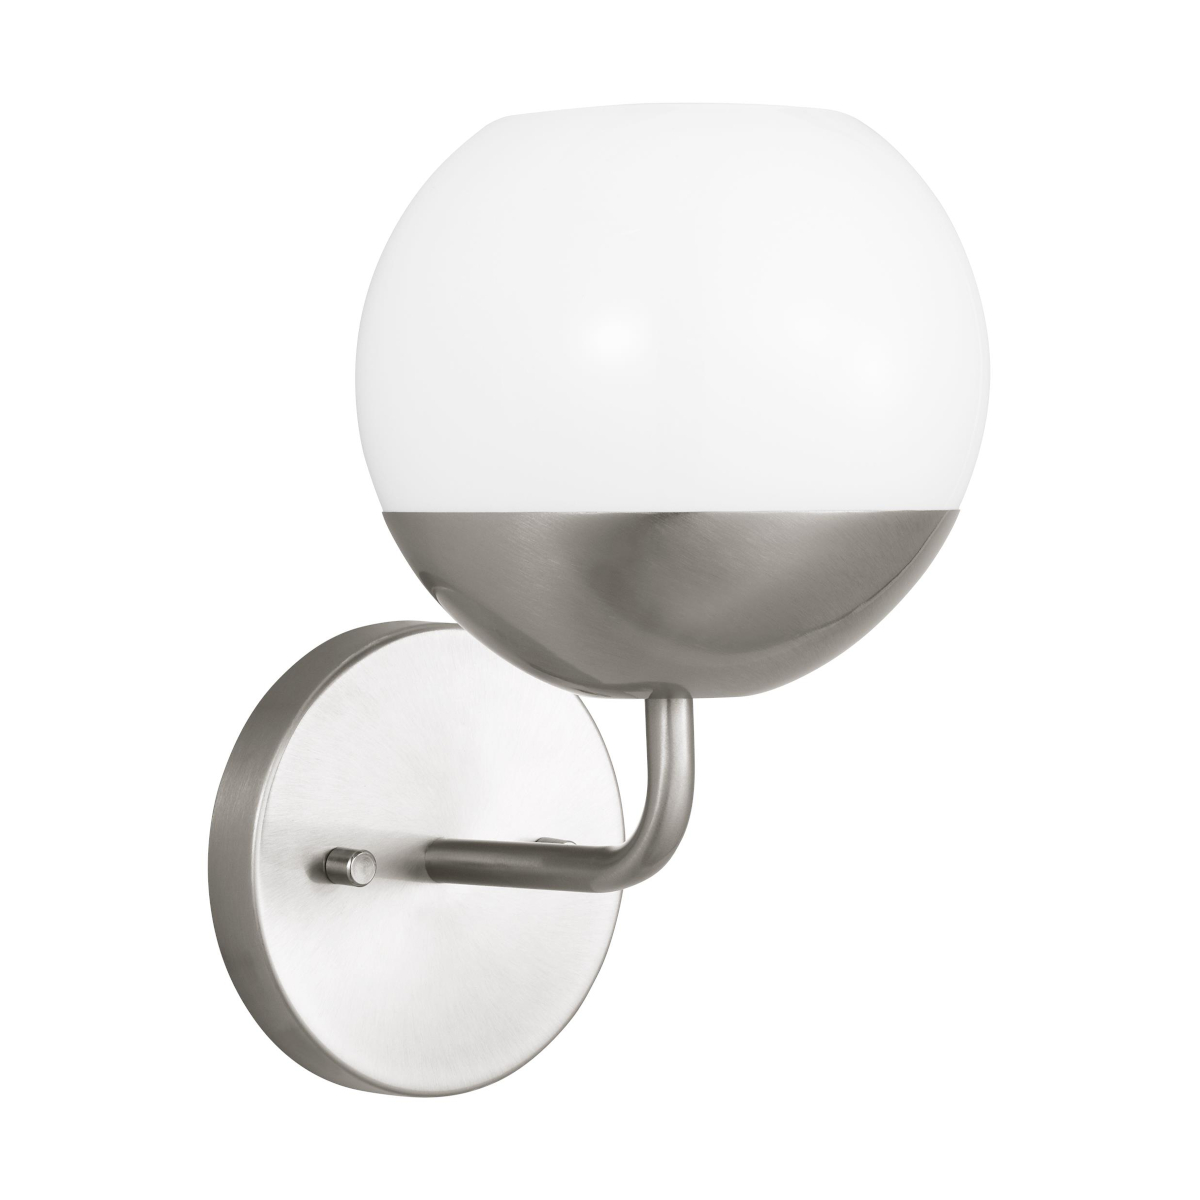 Alvin Brushed Nickel Wall Light with Opal White Glass